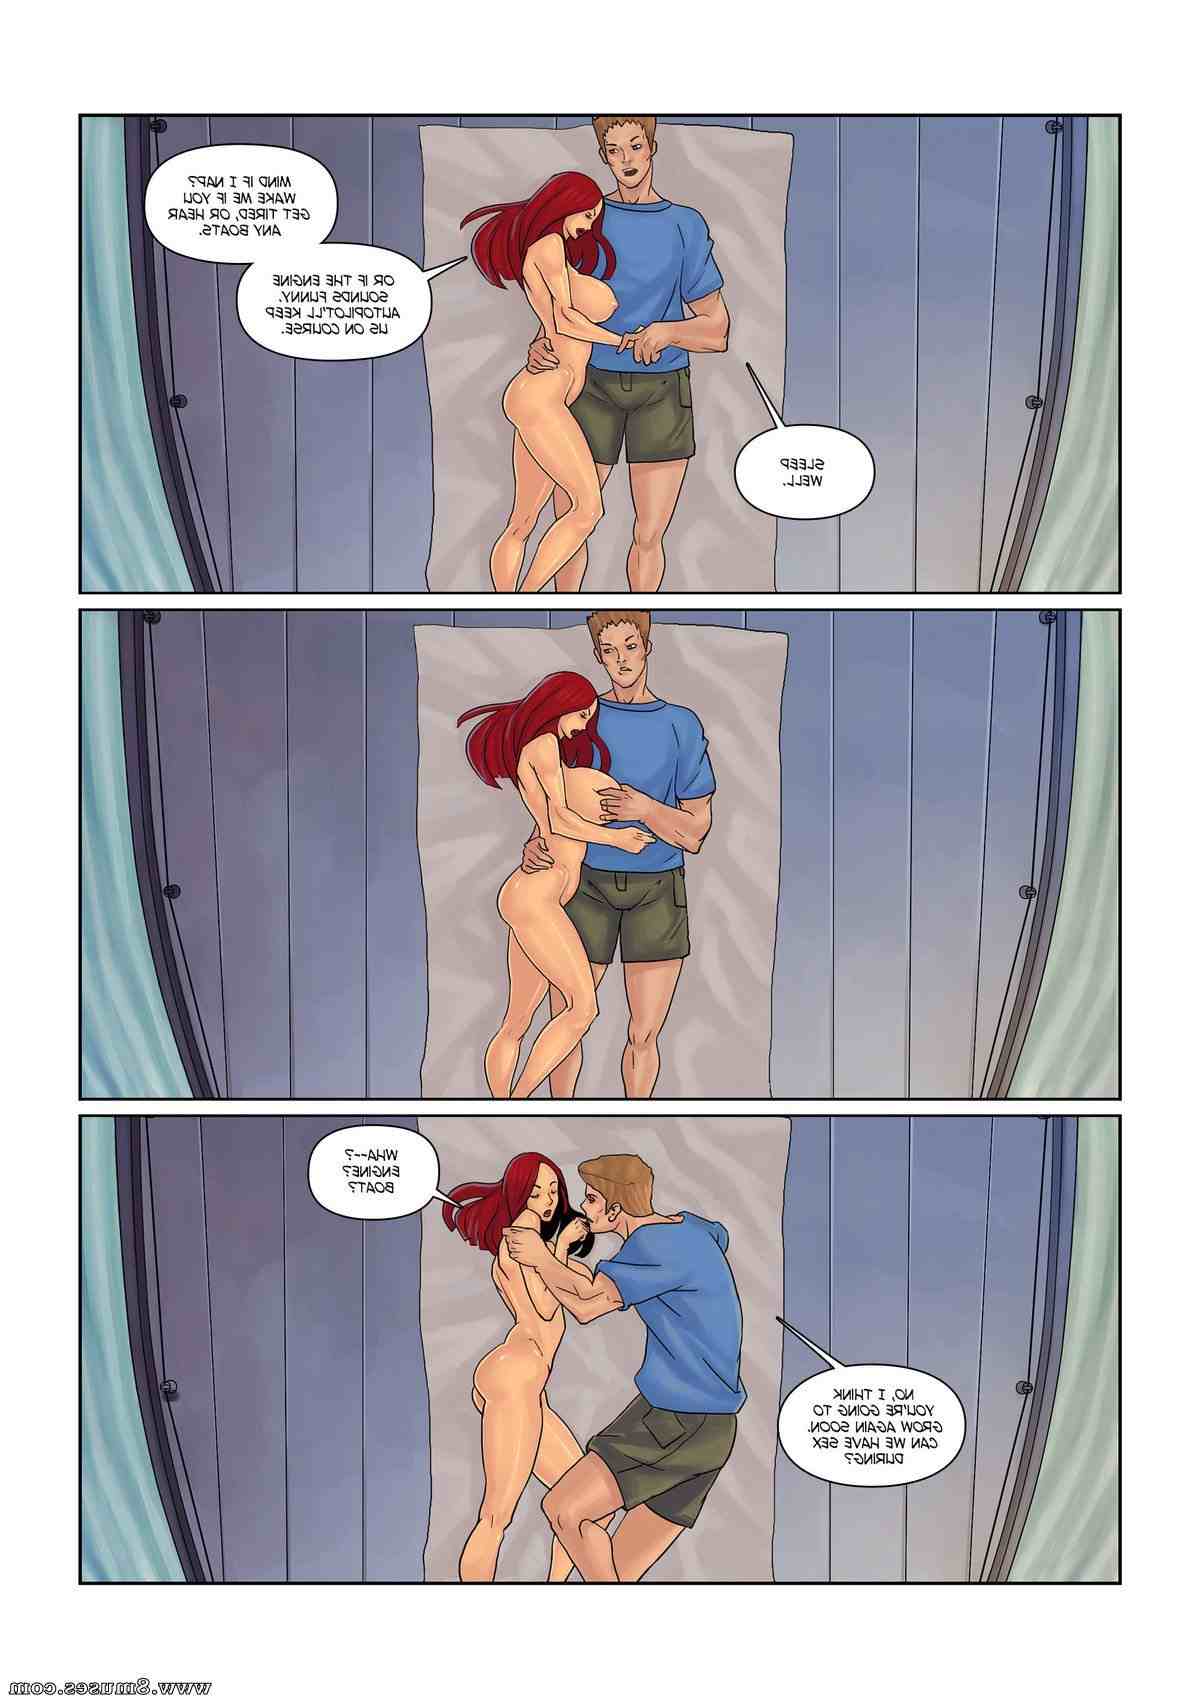 Expansionfan-Comics/Homebody Homebody__8muses_-_Sex_and_Porn_Comics_8.jpg